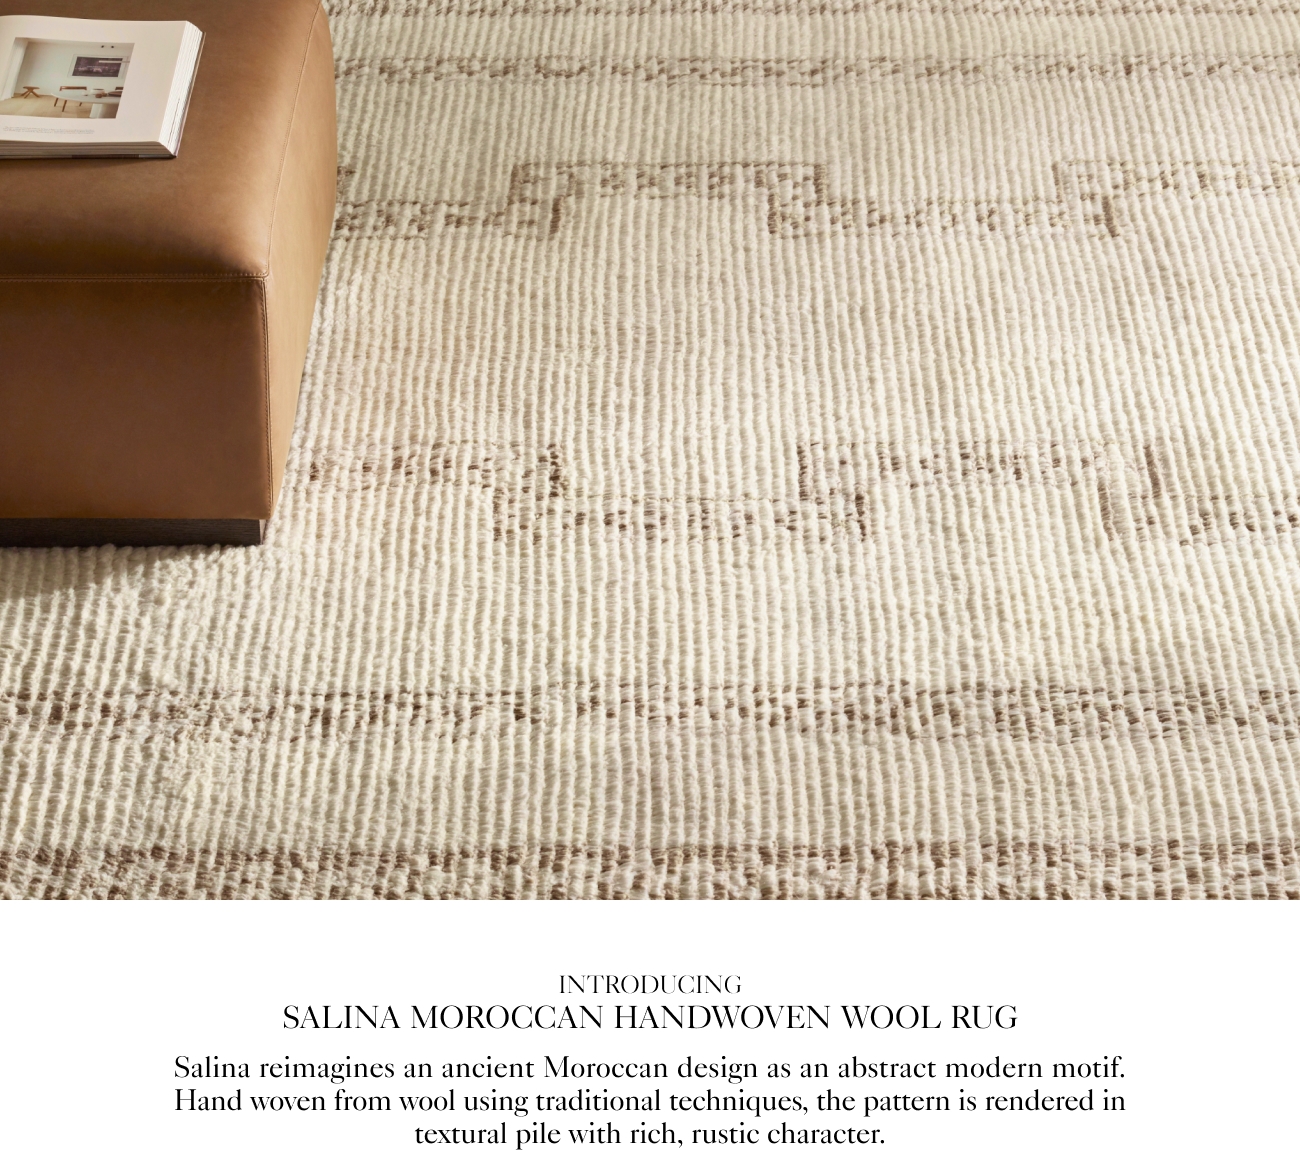  INTRODUCING SALINA MOROCCAN HANDWOVEN WOOL RUG Salina reimagines an ancient Moroccan design as an abstract modern motif. Hand woven from wool using traditional techniques, the pattern is rendered in textural pile with rich, rustic character. 